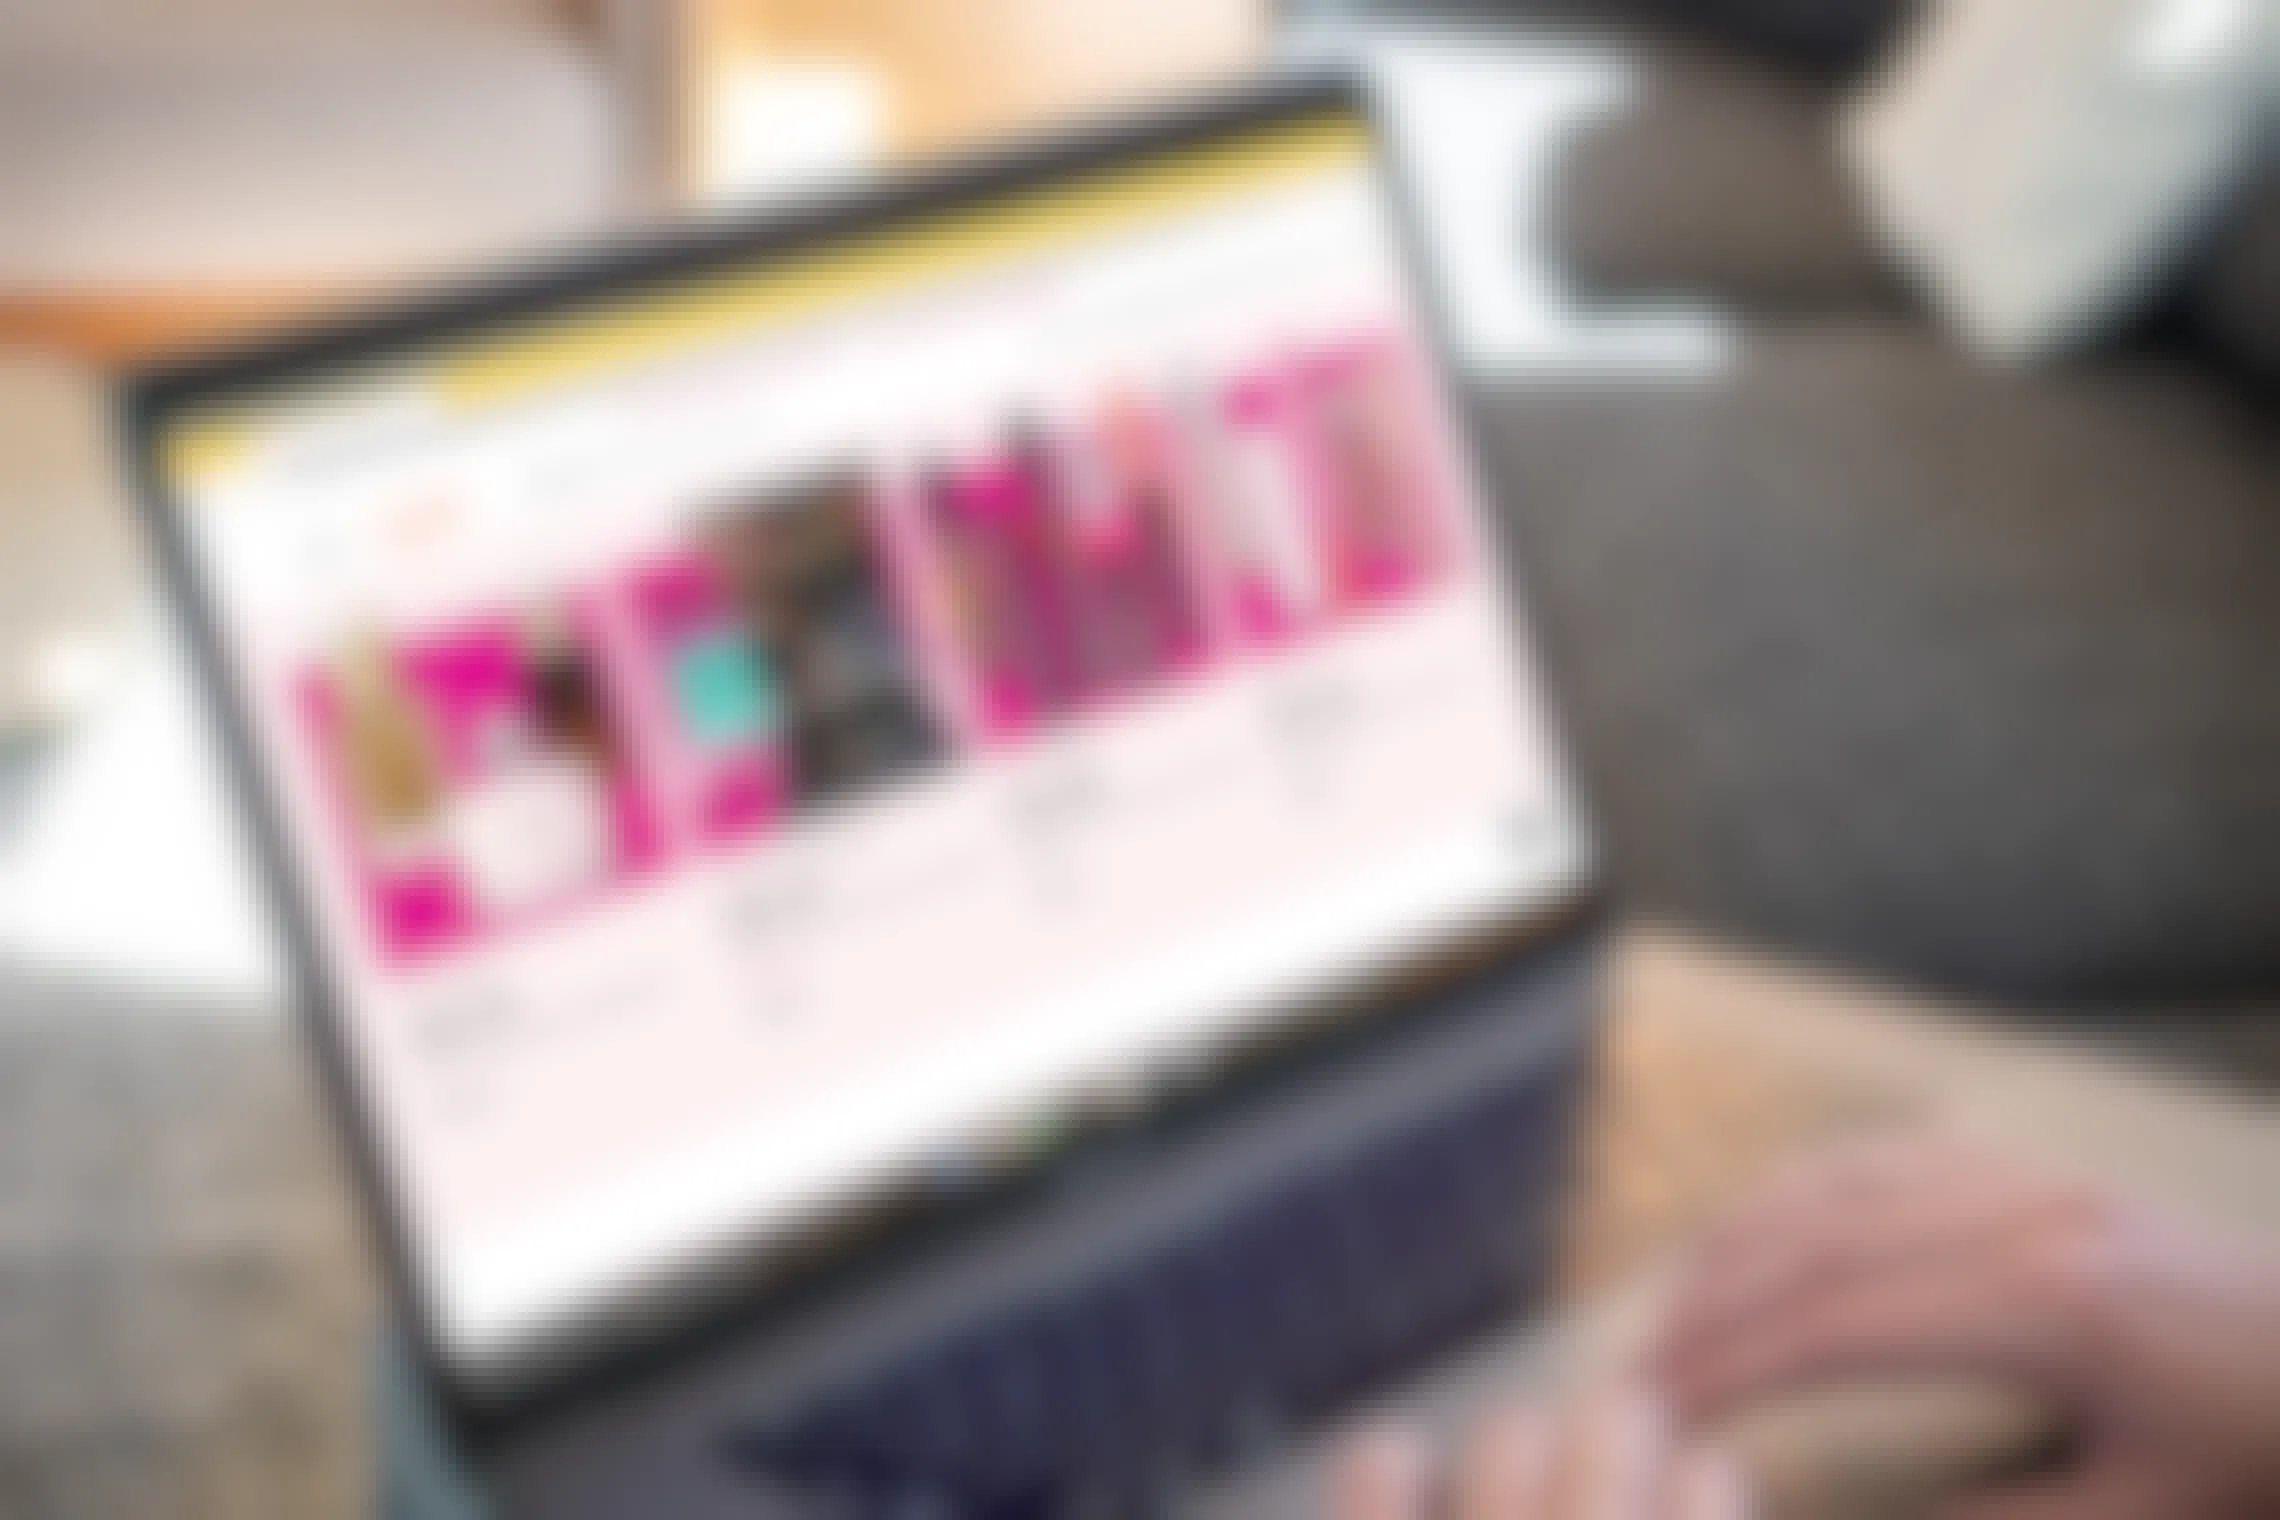 Ulta Cyber Monday Deals in 2022 Include a Free Robe or Beauty Bag